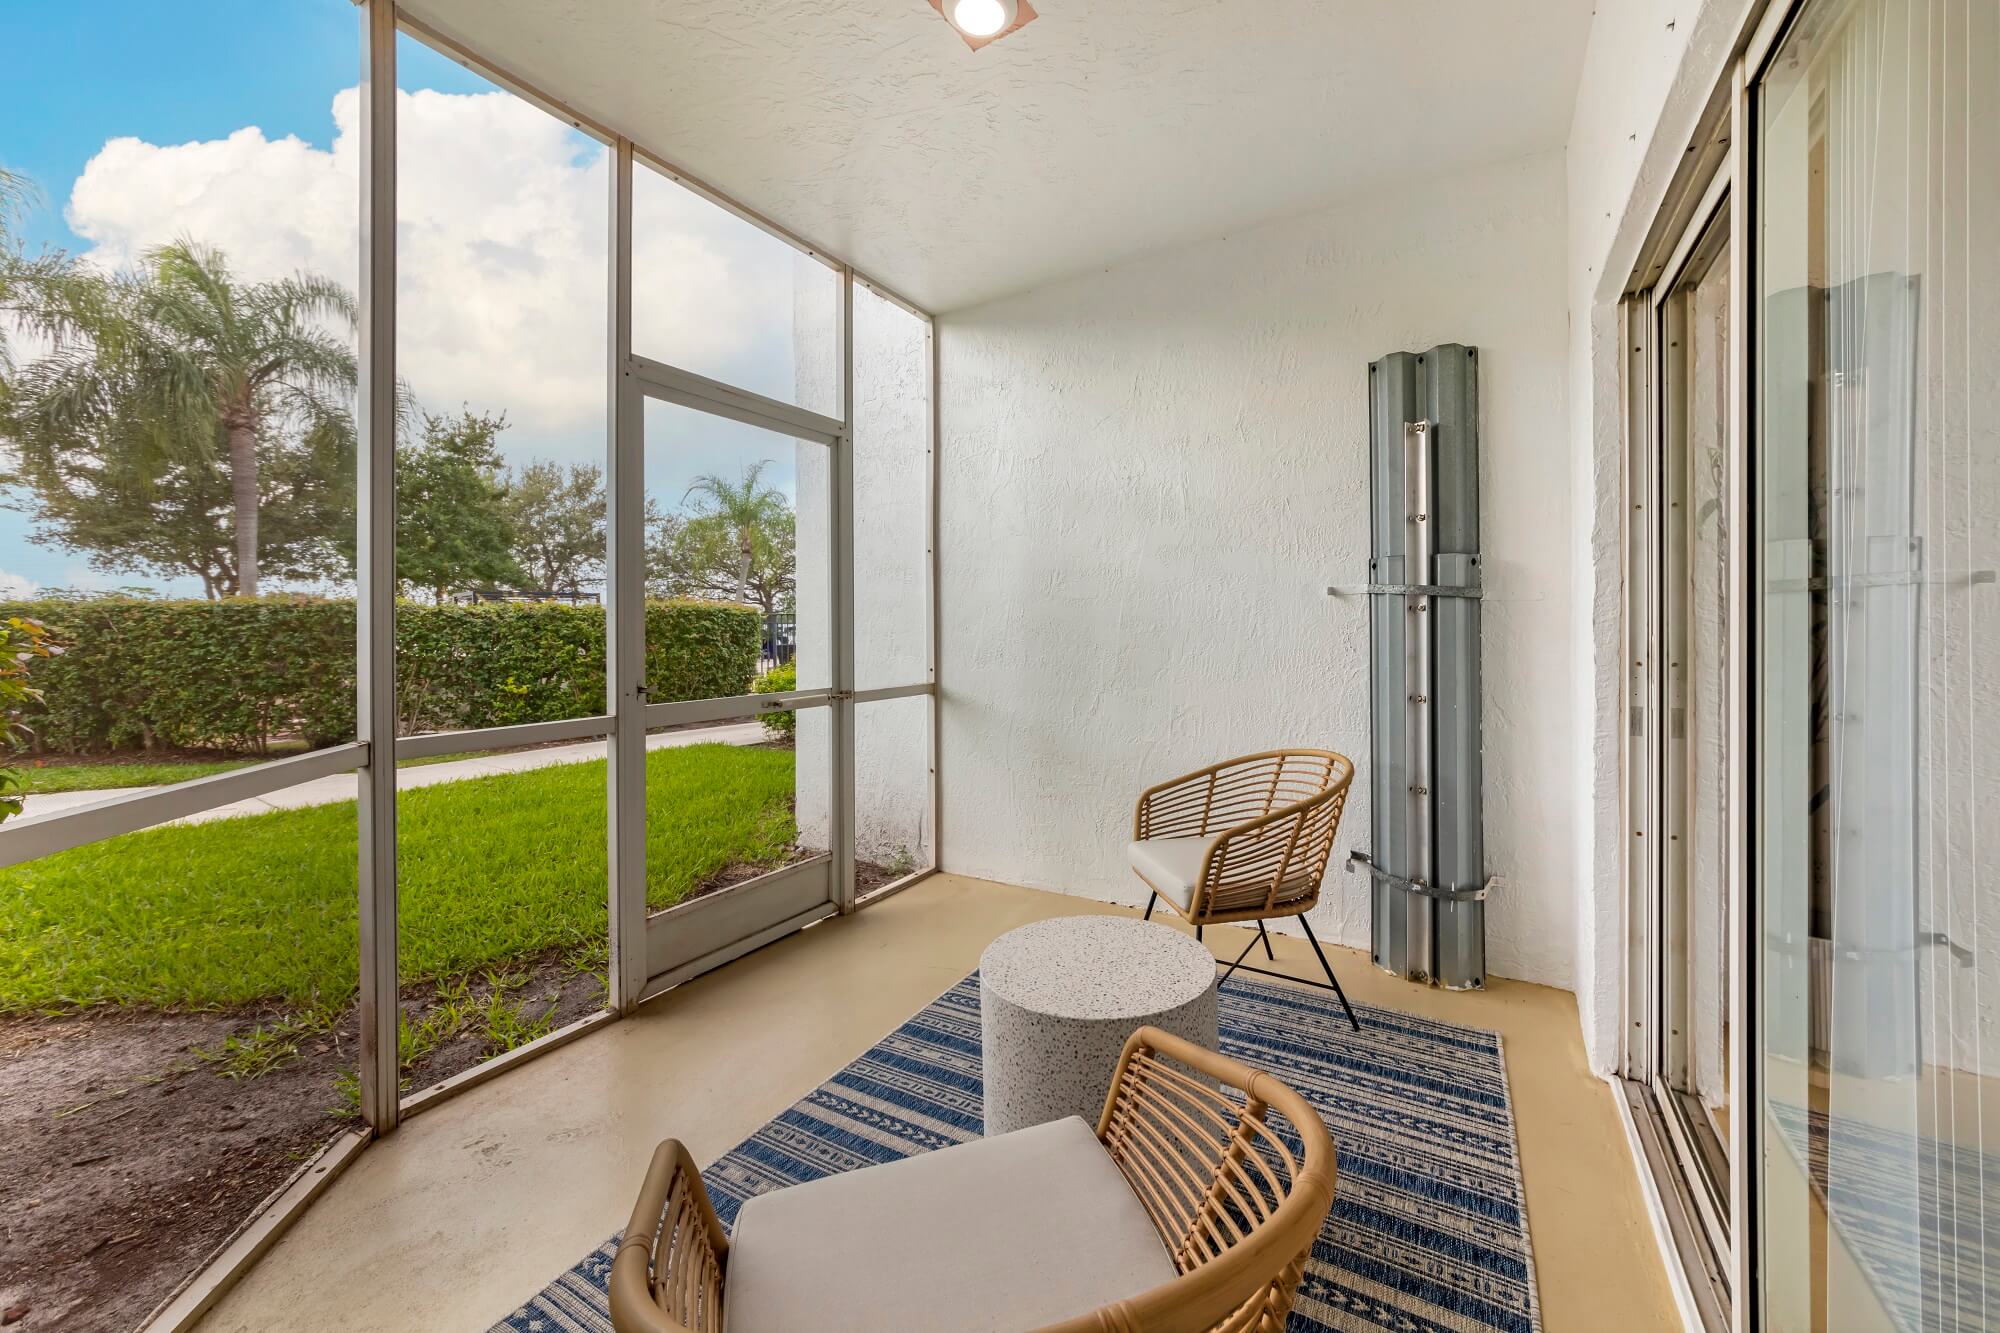 Model unit screened in porch with grassy area outside with palm trees in the back